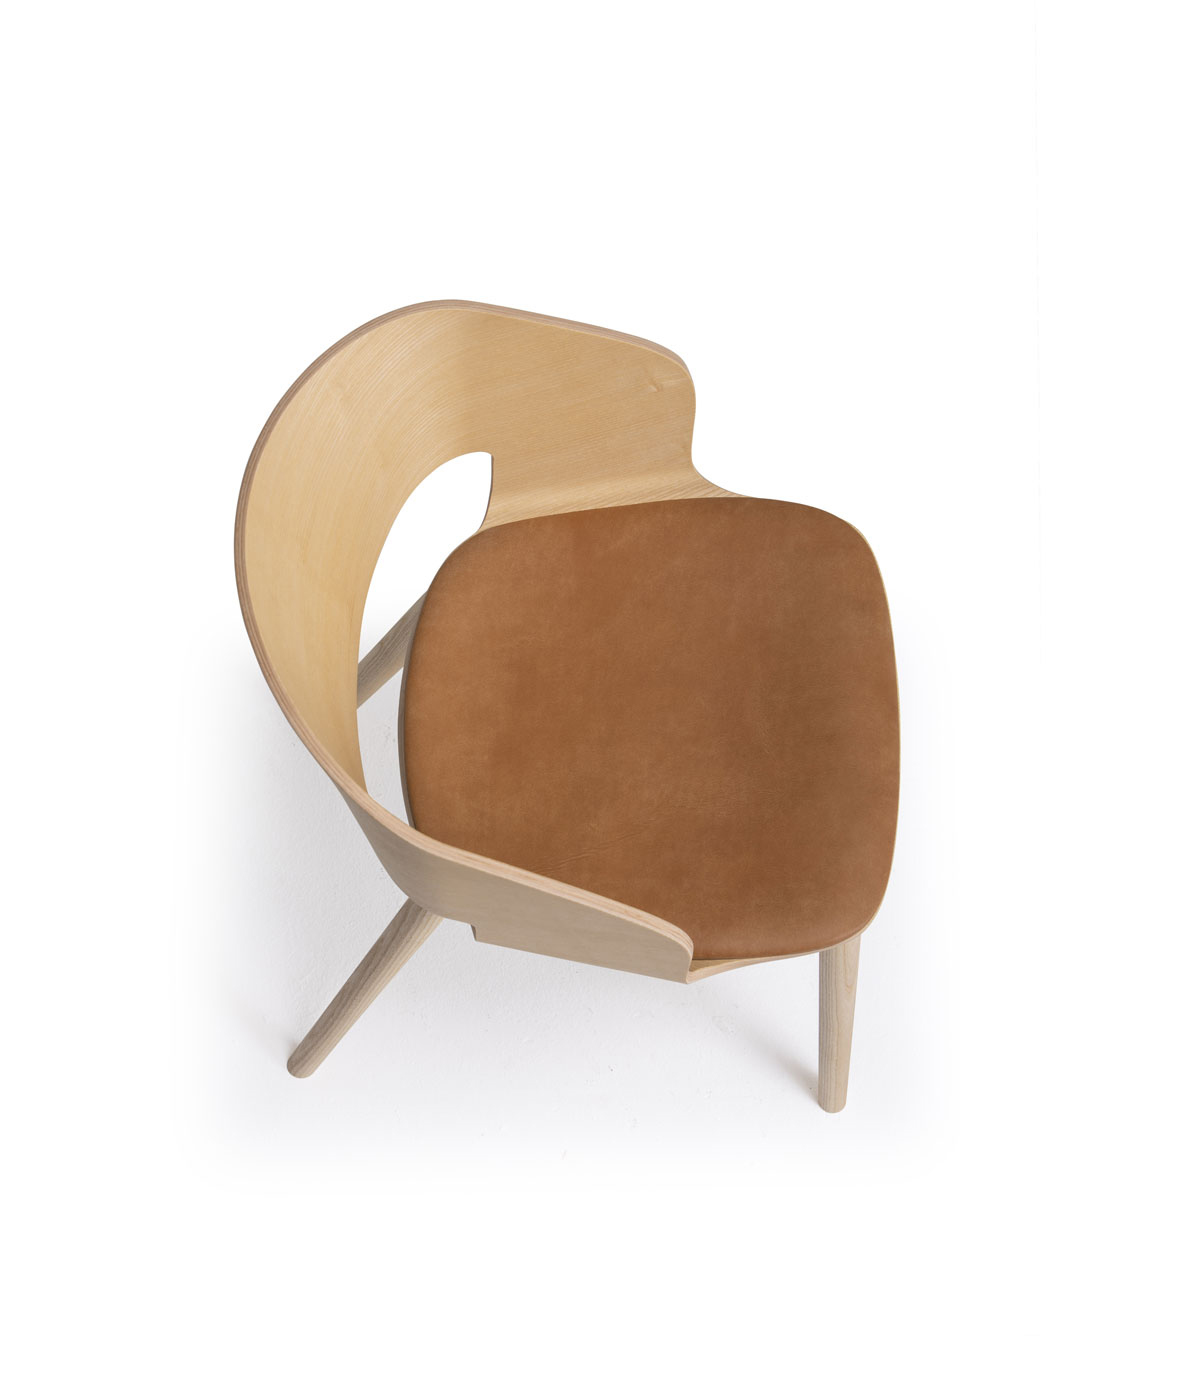 Goose chair Model A with wooden armrests and legs - Vergés